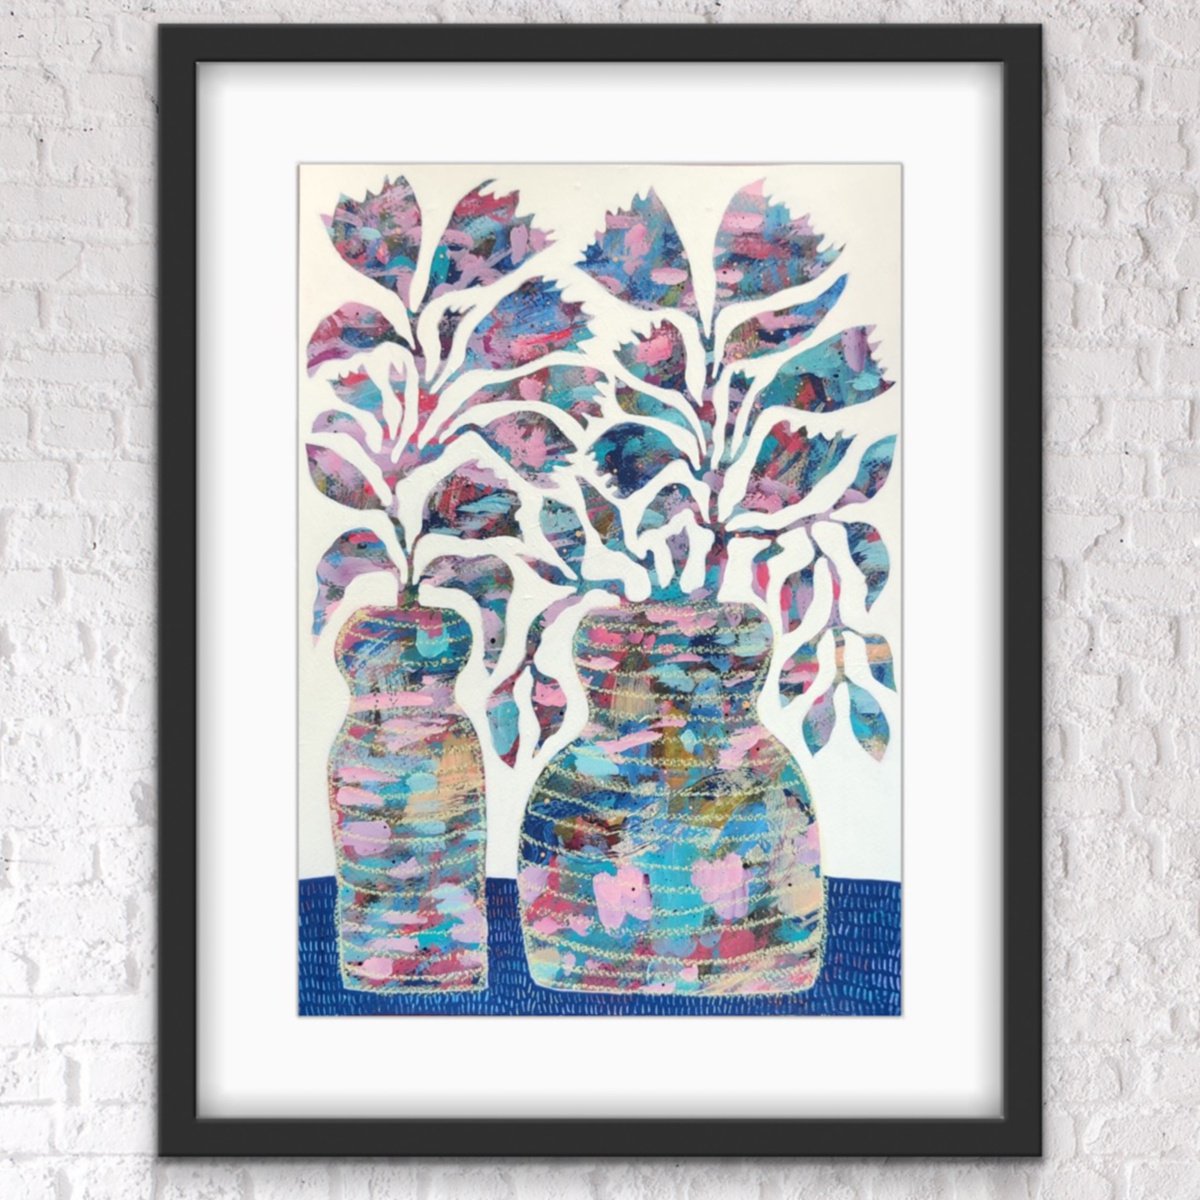 Flowers in striped vases by Ketki Fadnis